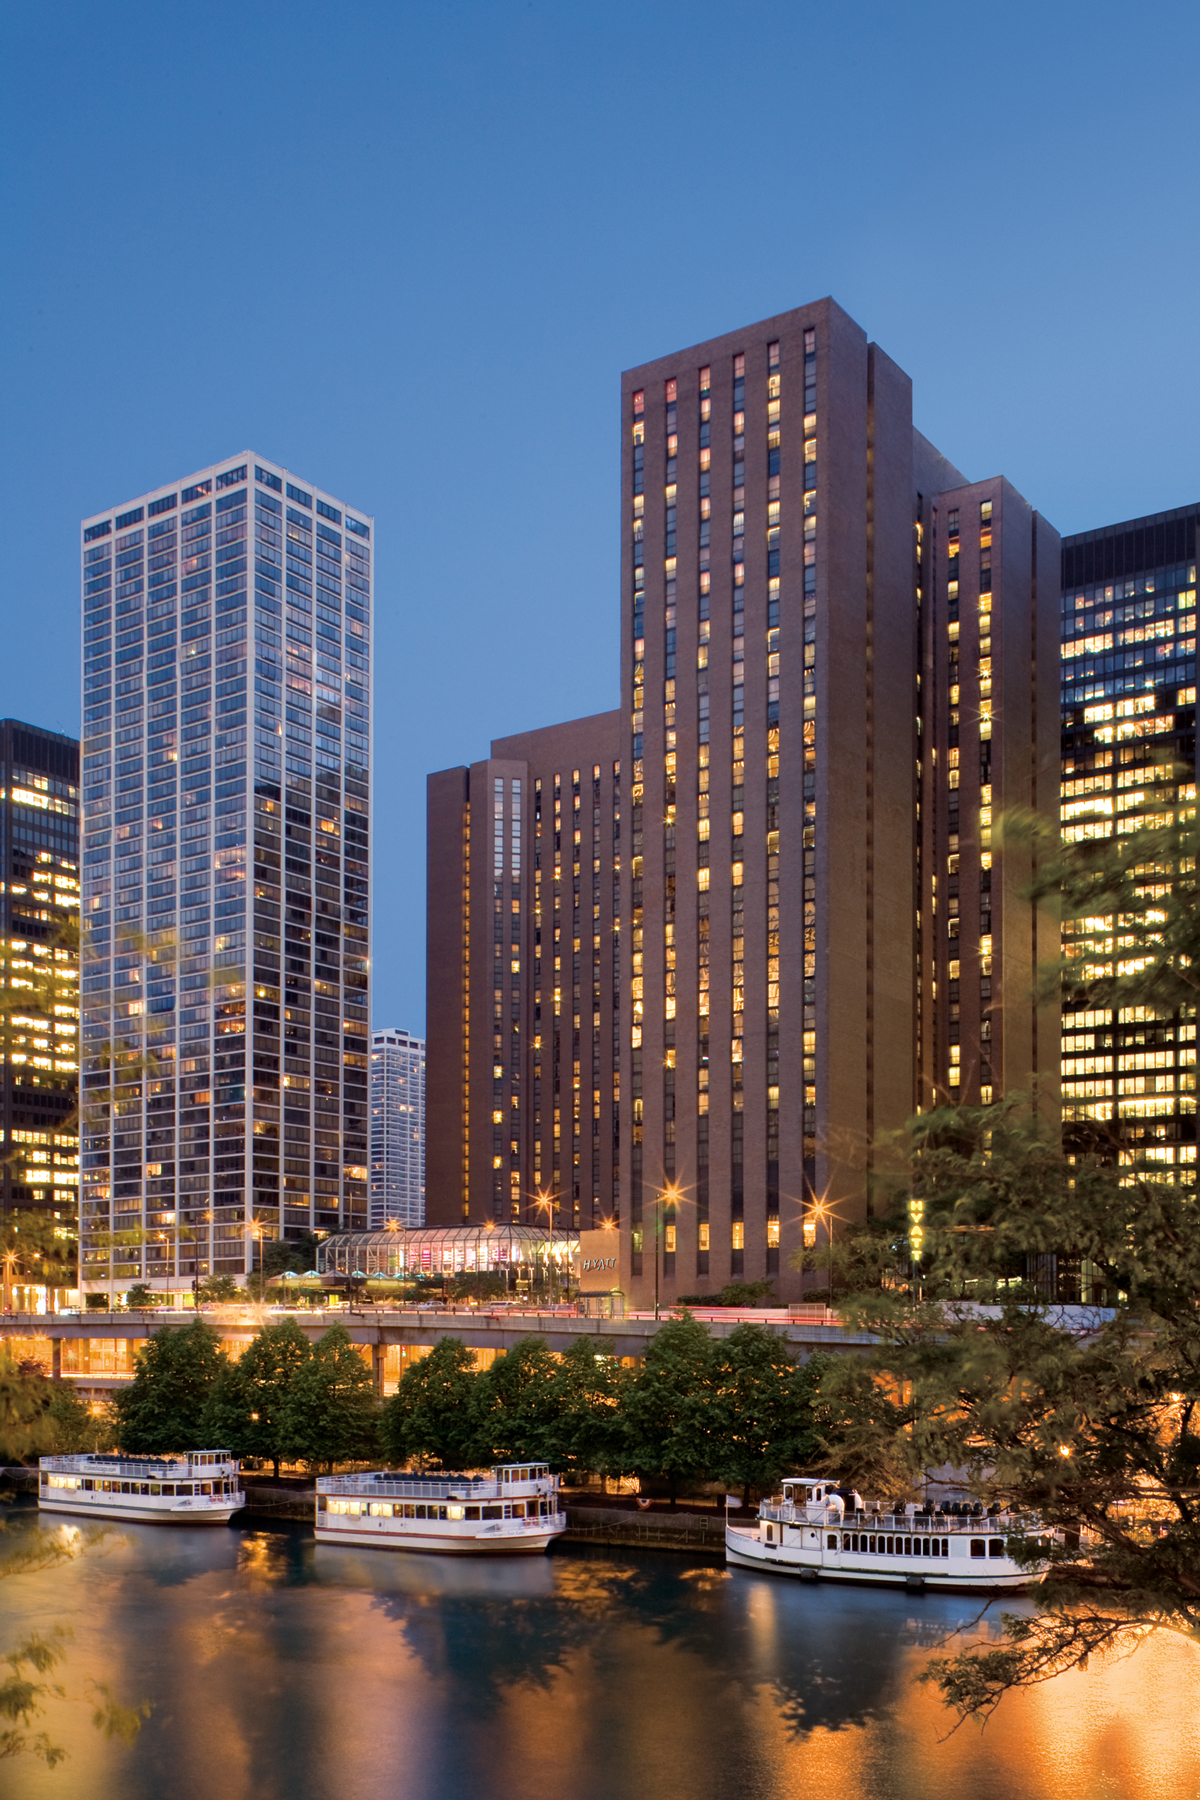 Hyatt Regency Chicago oversees the Chicago River and is adjacent to Lake Michigan.